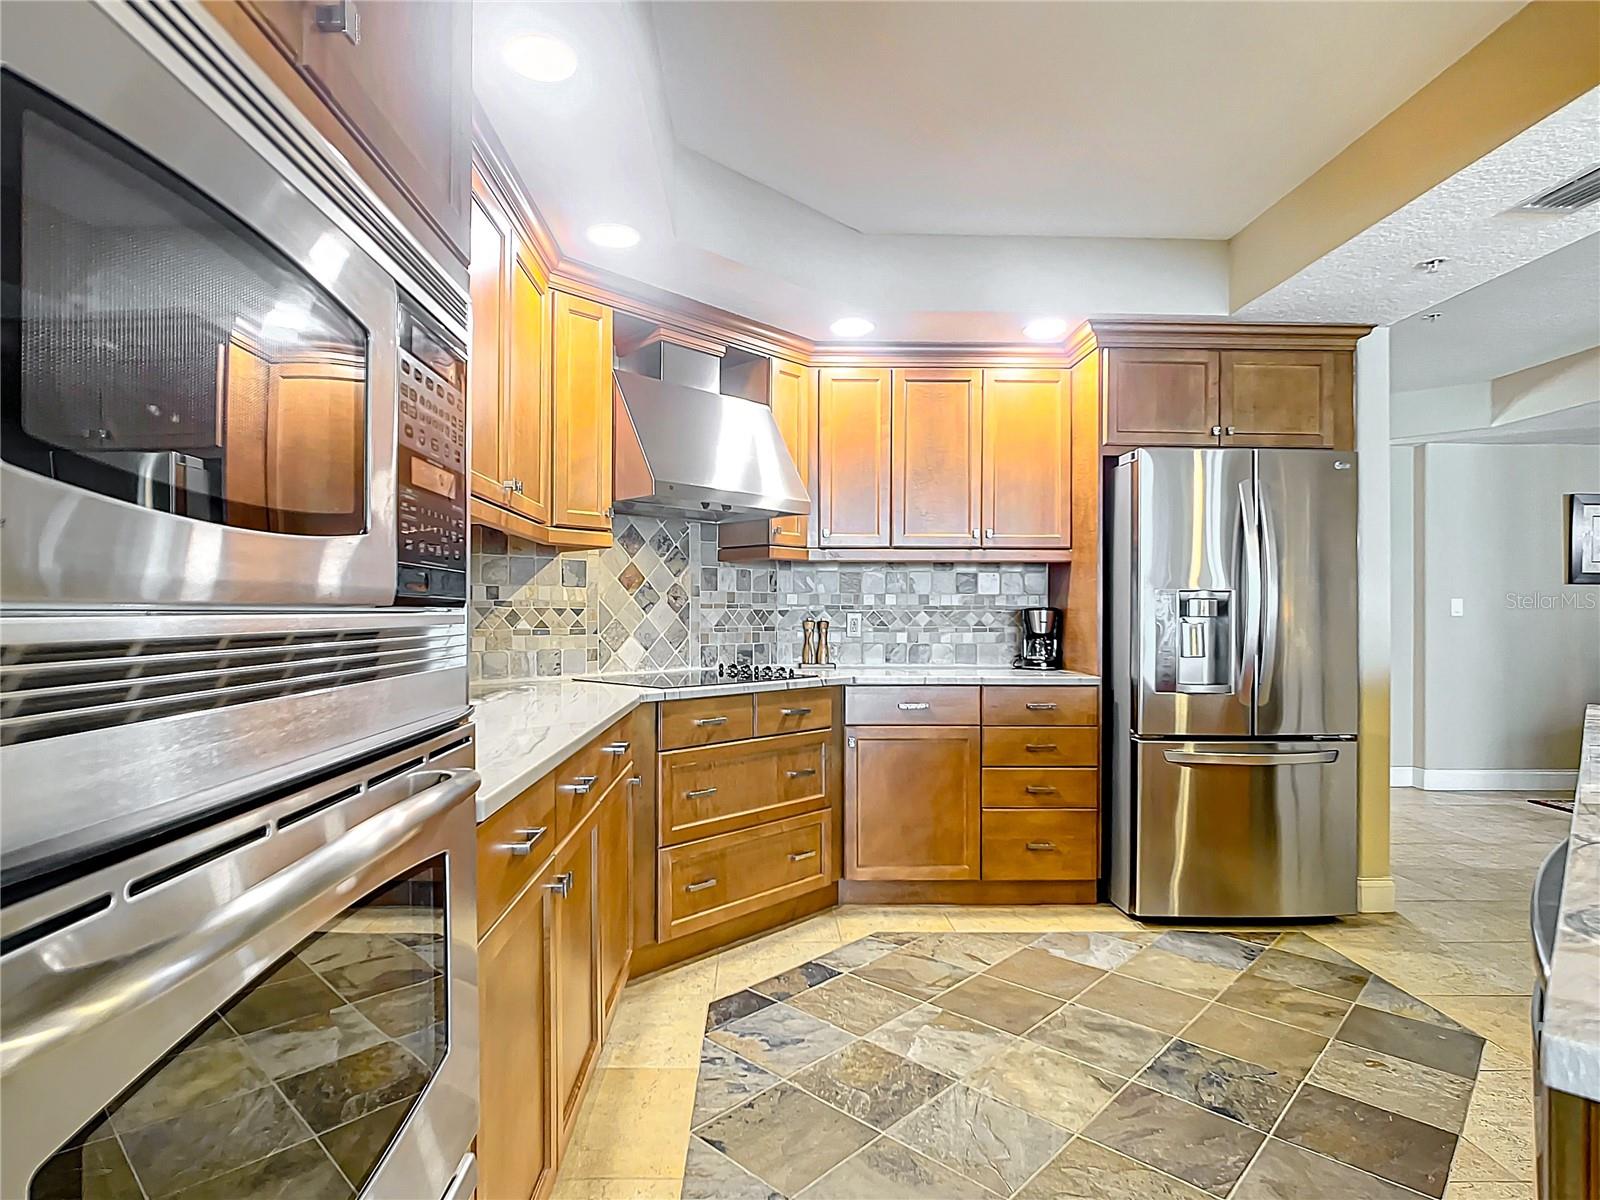 This view shows all the nice stainless steel appliances and how there is enough space for more than one cook